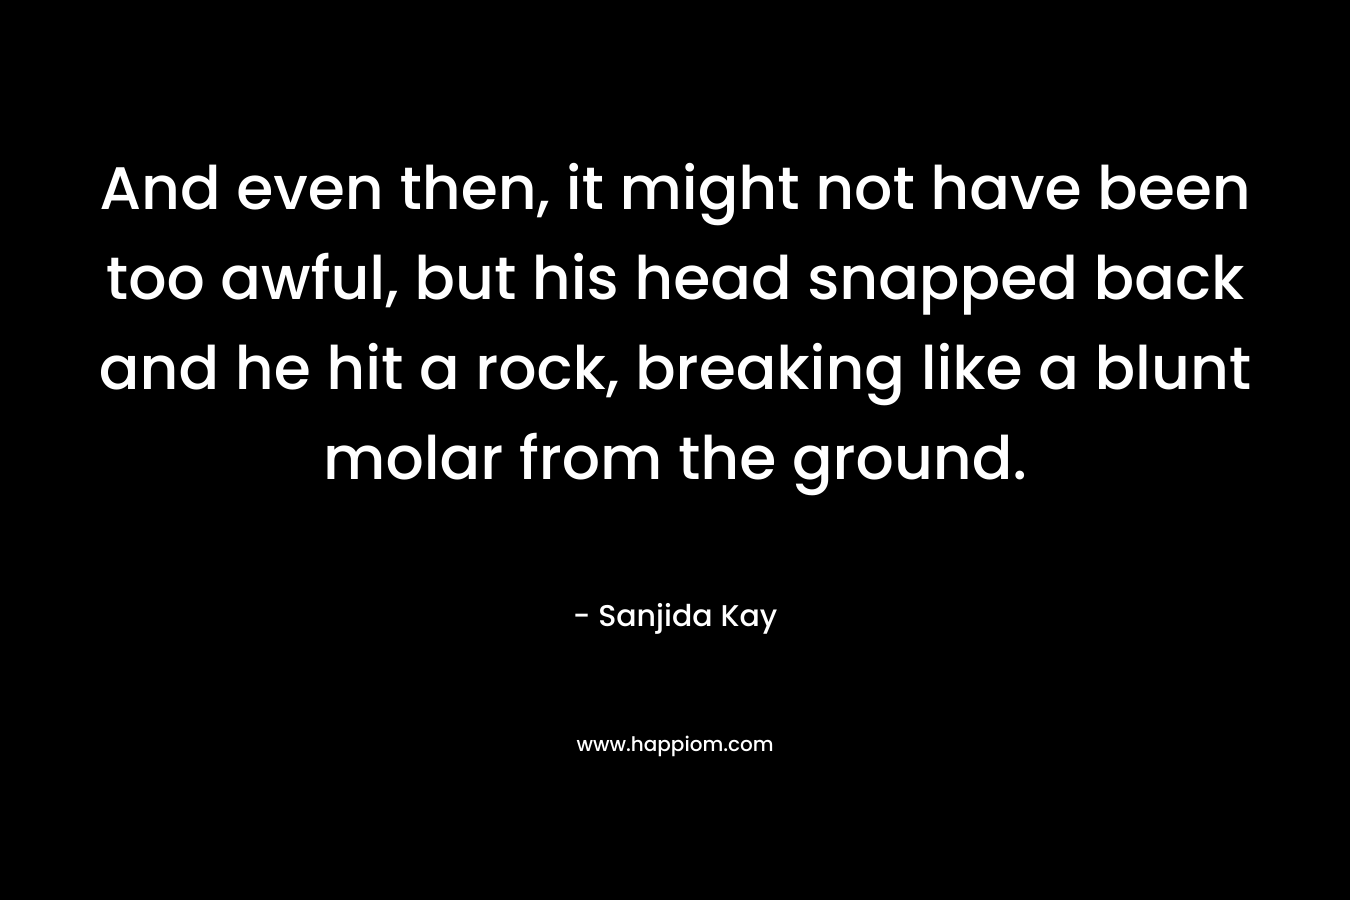 And even then, it might not have been too awful, but his head snapped back and he hit a rock, breaking like a blunt molar from the ground. – Sanjida Kay